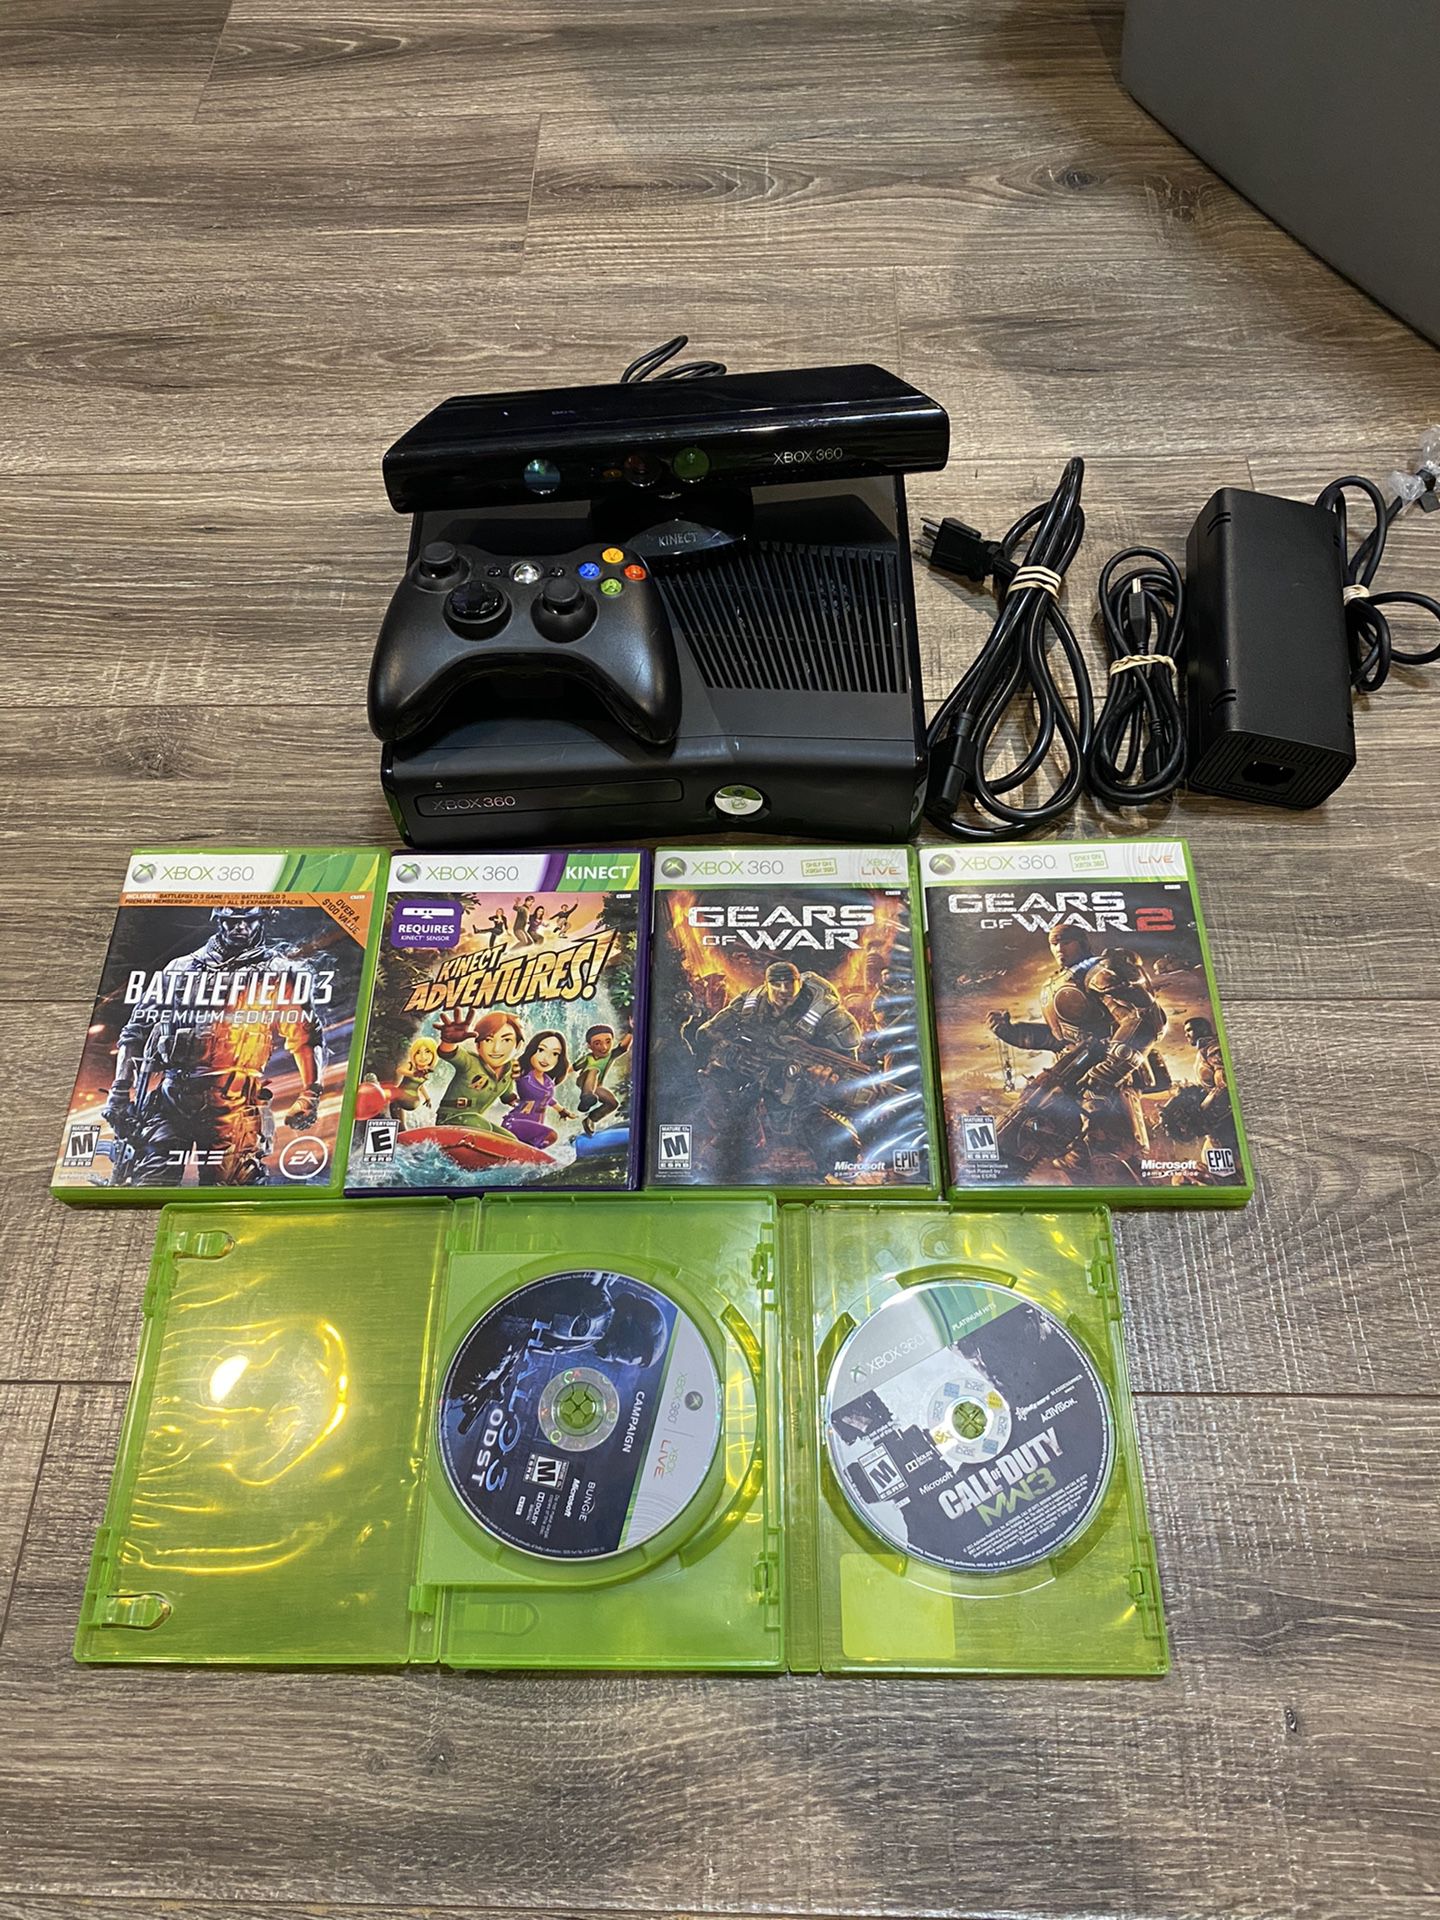 Xbox 360 4gb with games